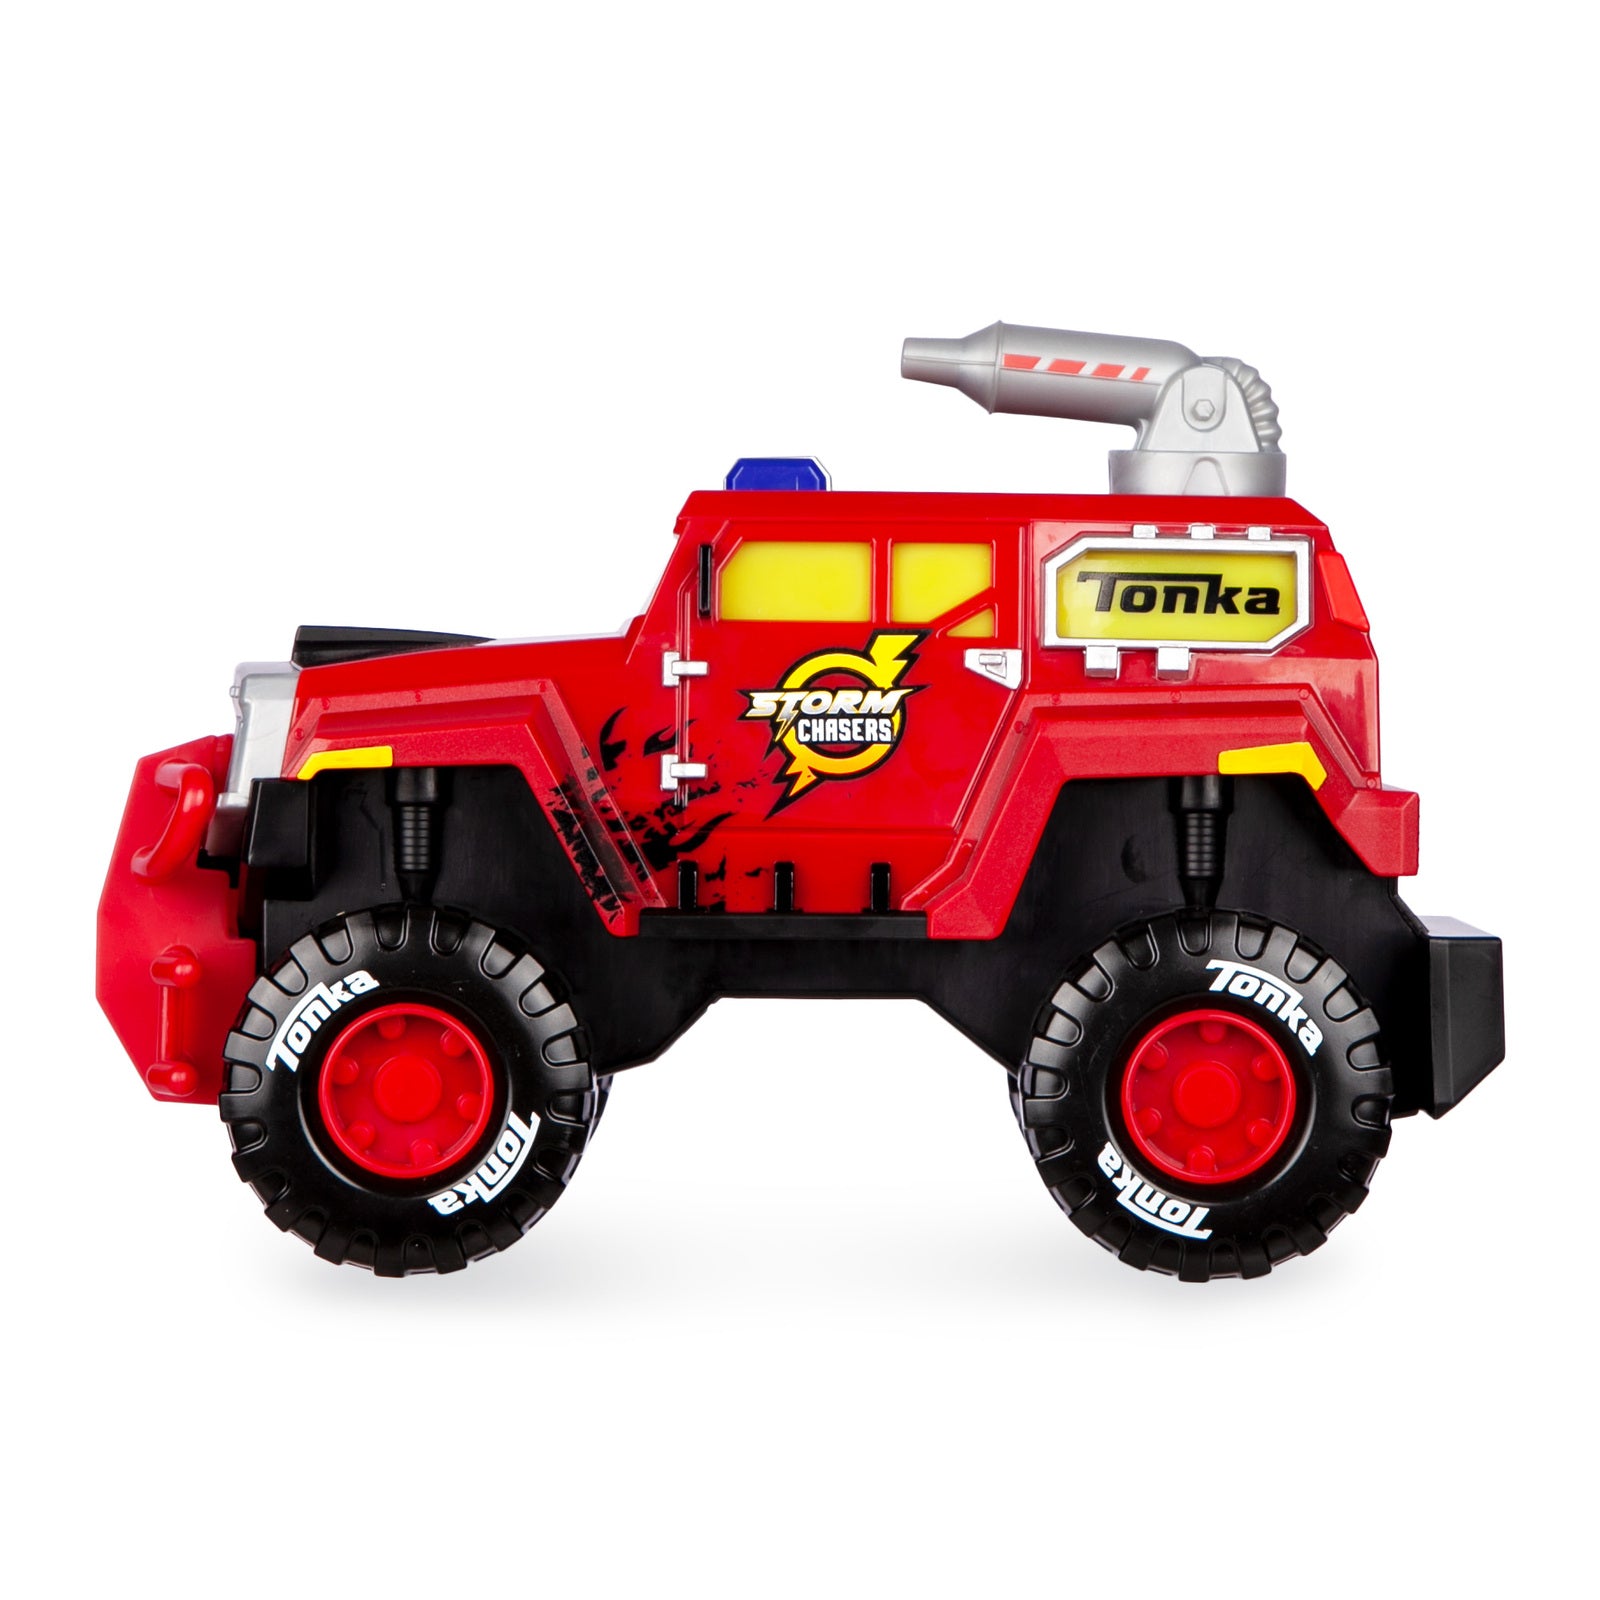 Tonka Storm Chasers - Wildfire Rescue